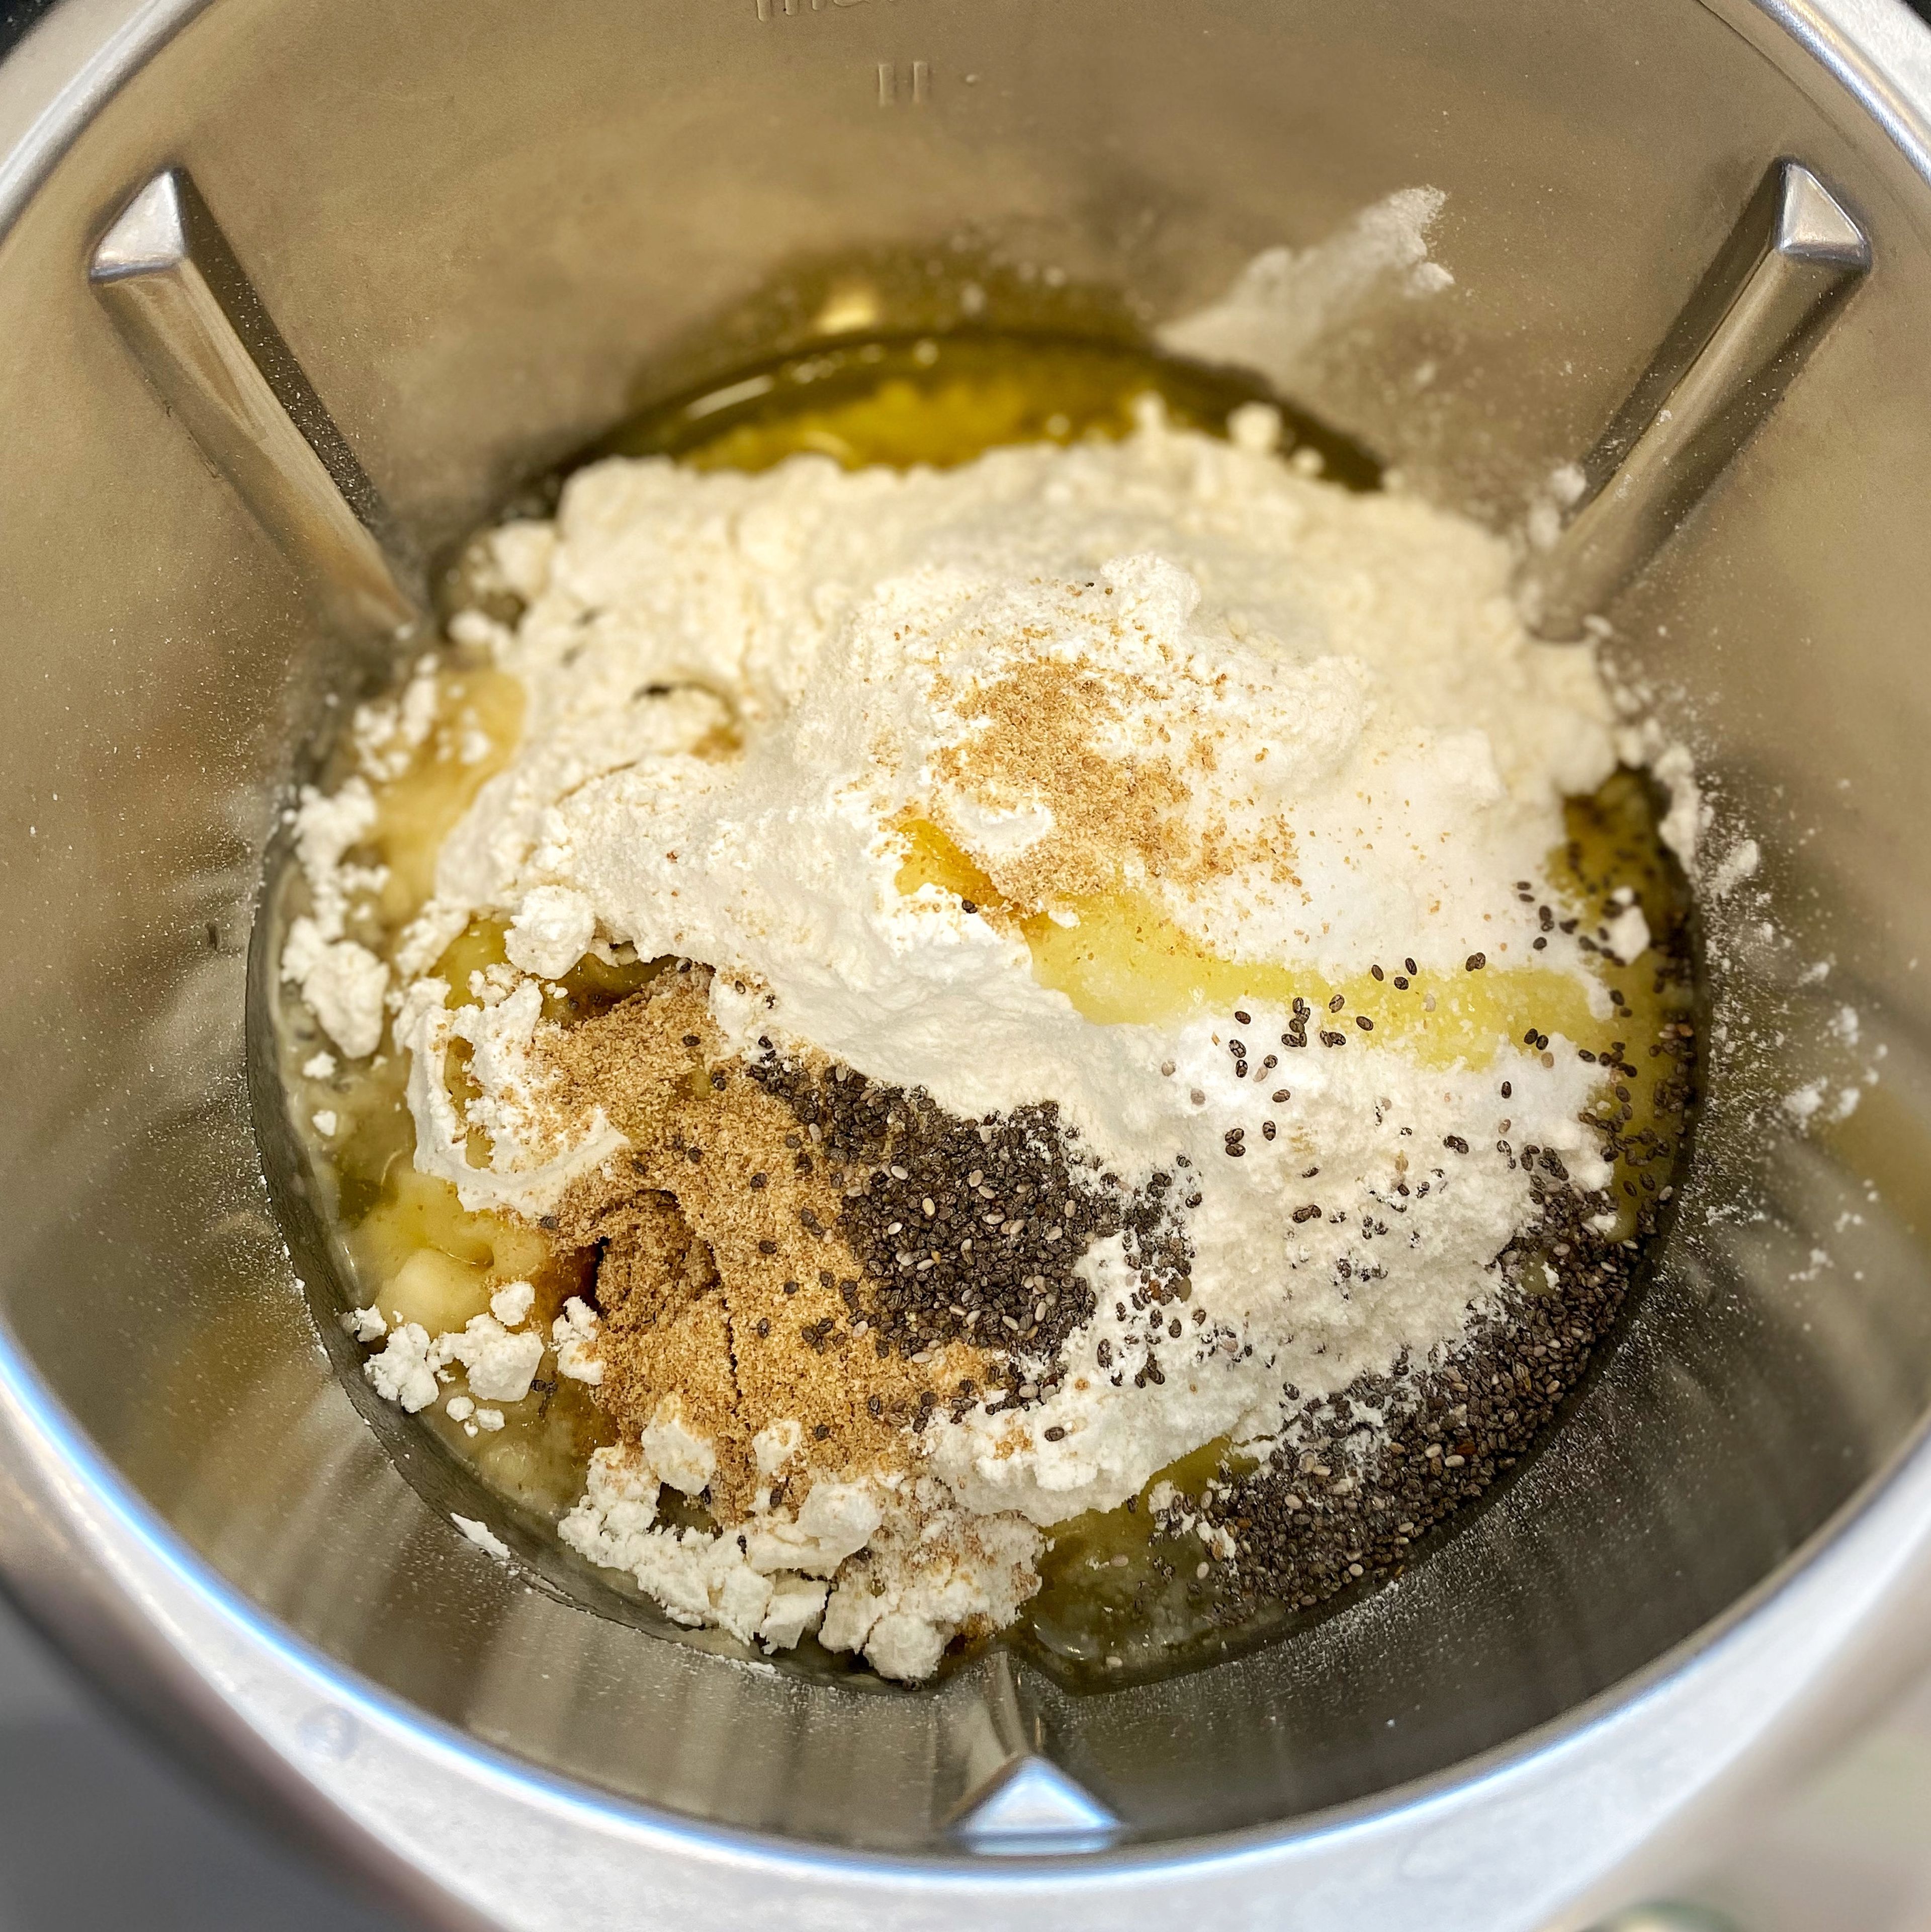 If using a stand mixer, attach the dough hook and combine the yeast/water mixture, flour, salt, olive oil, flaxseed, and chia seeds- mix on low just to combine. If mixing by hand, combine ingredients together and knead the dough for about 5-6 minutes.